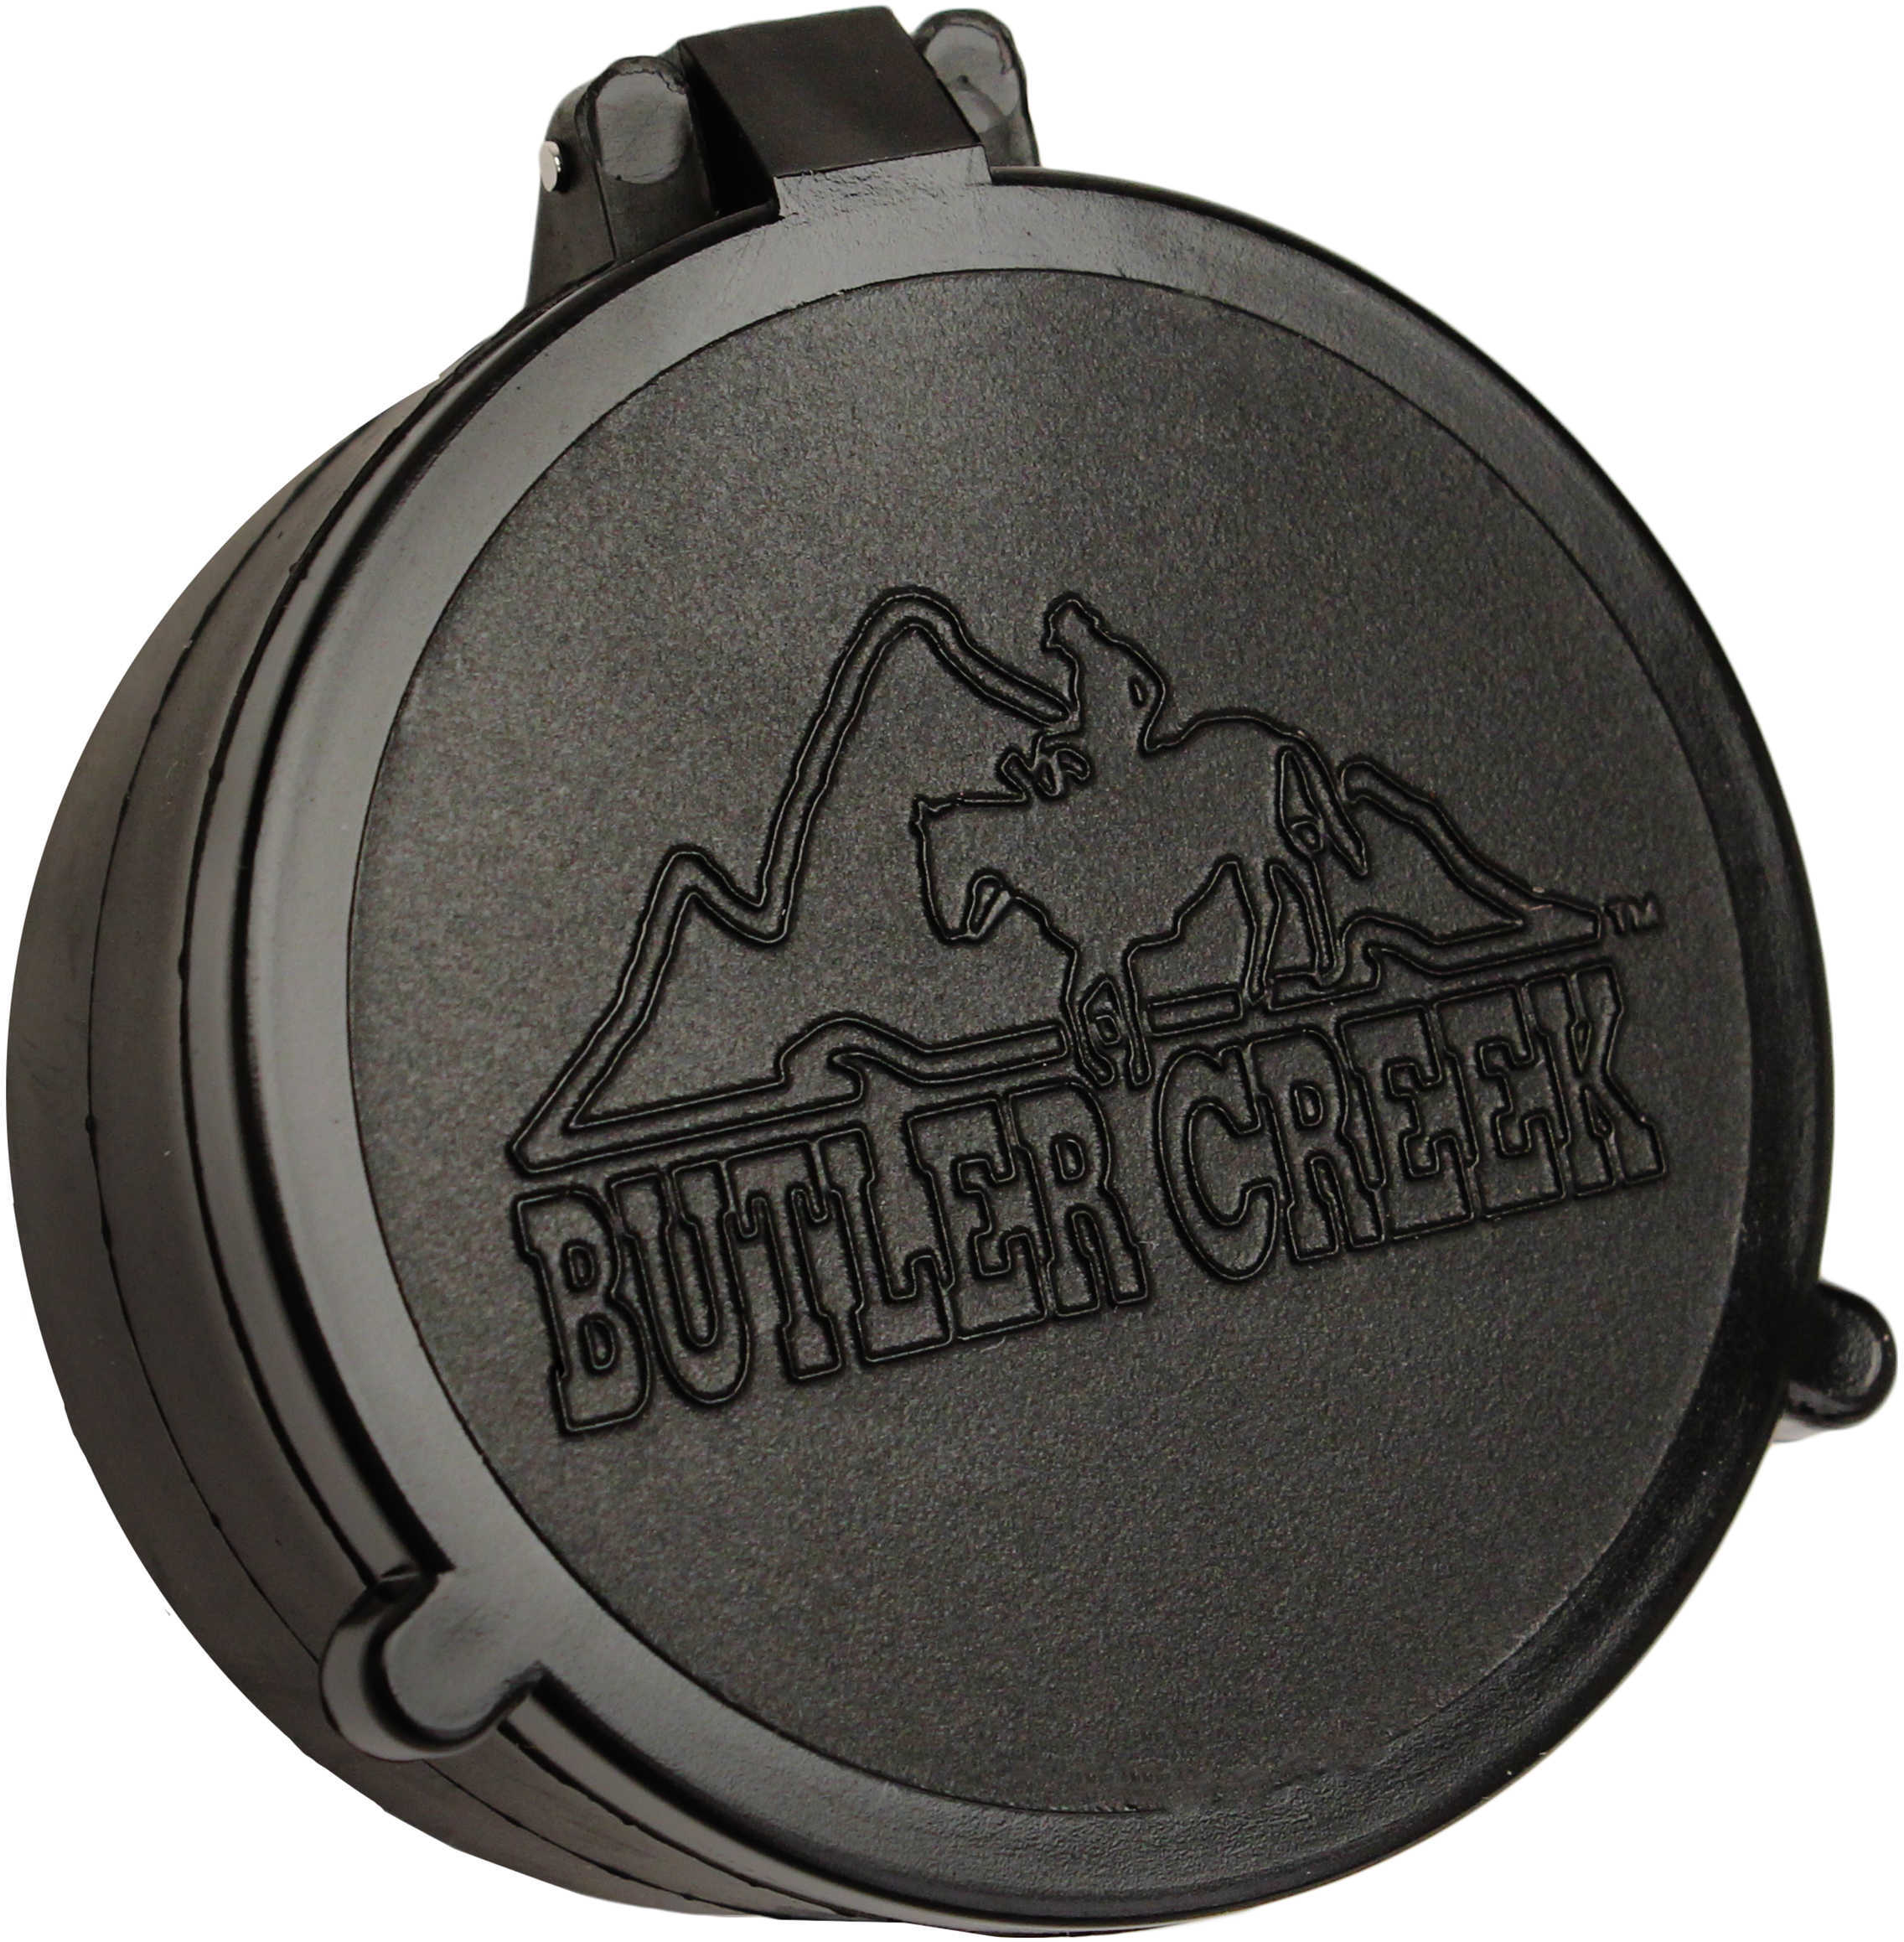 Butler Creek Flip-Open Scope Cover - 40 Objective 2.250" Diameter Quiet Opening lids at The Touch Of Your thum